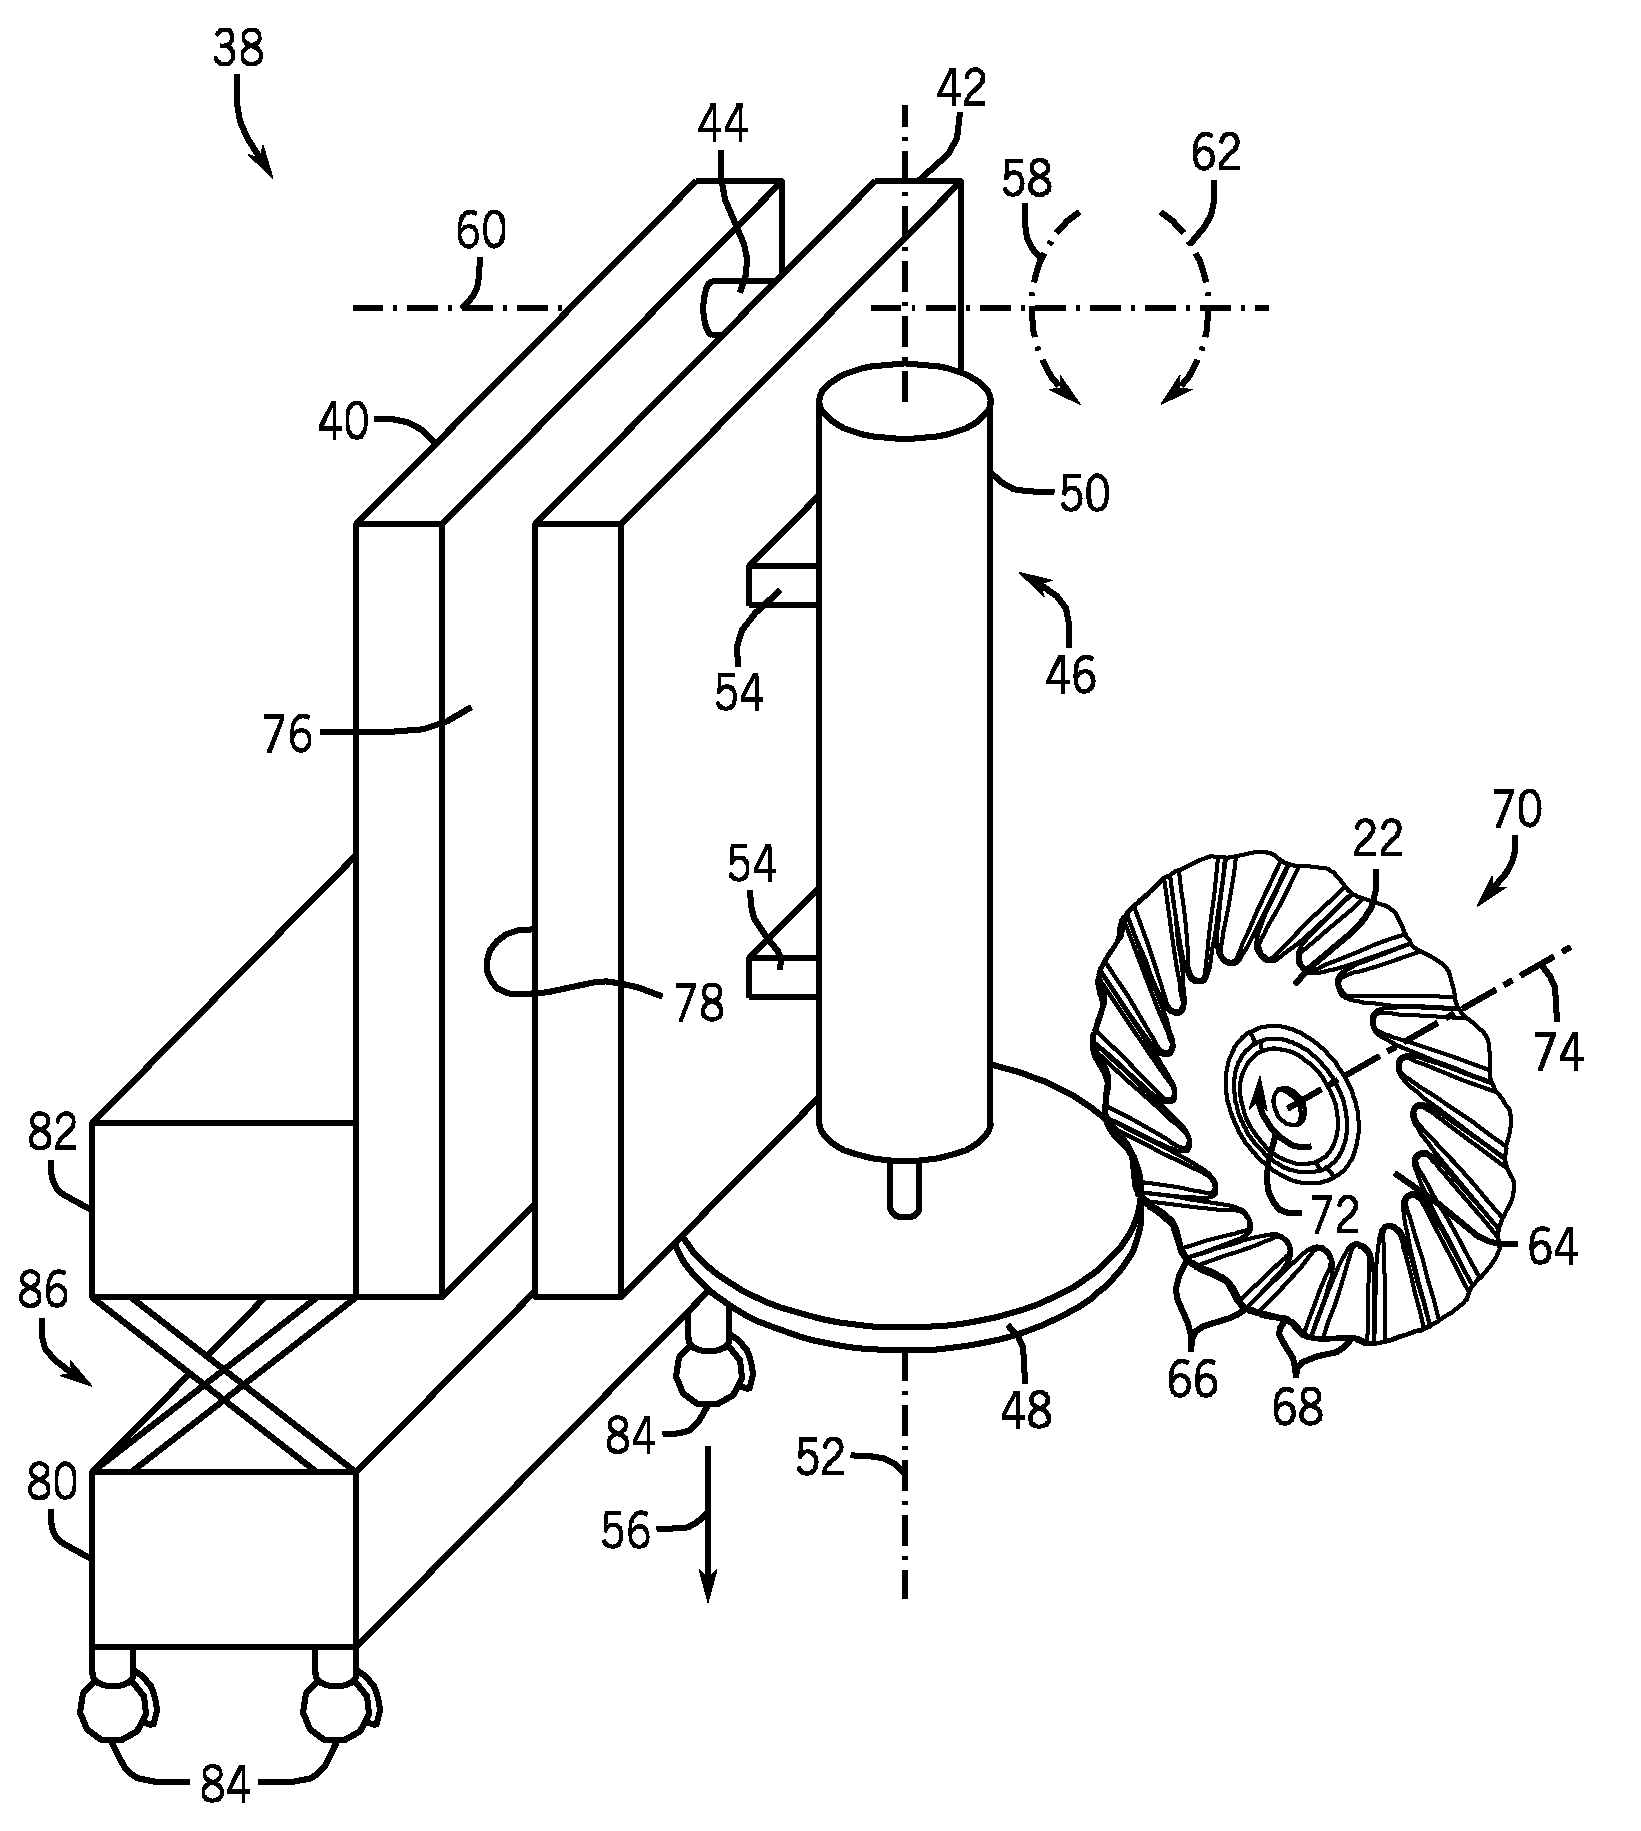 Blade sharpening system for agricultural implements